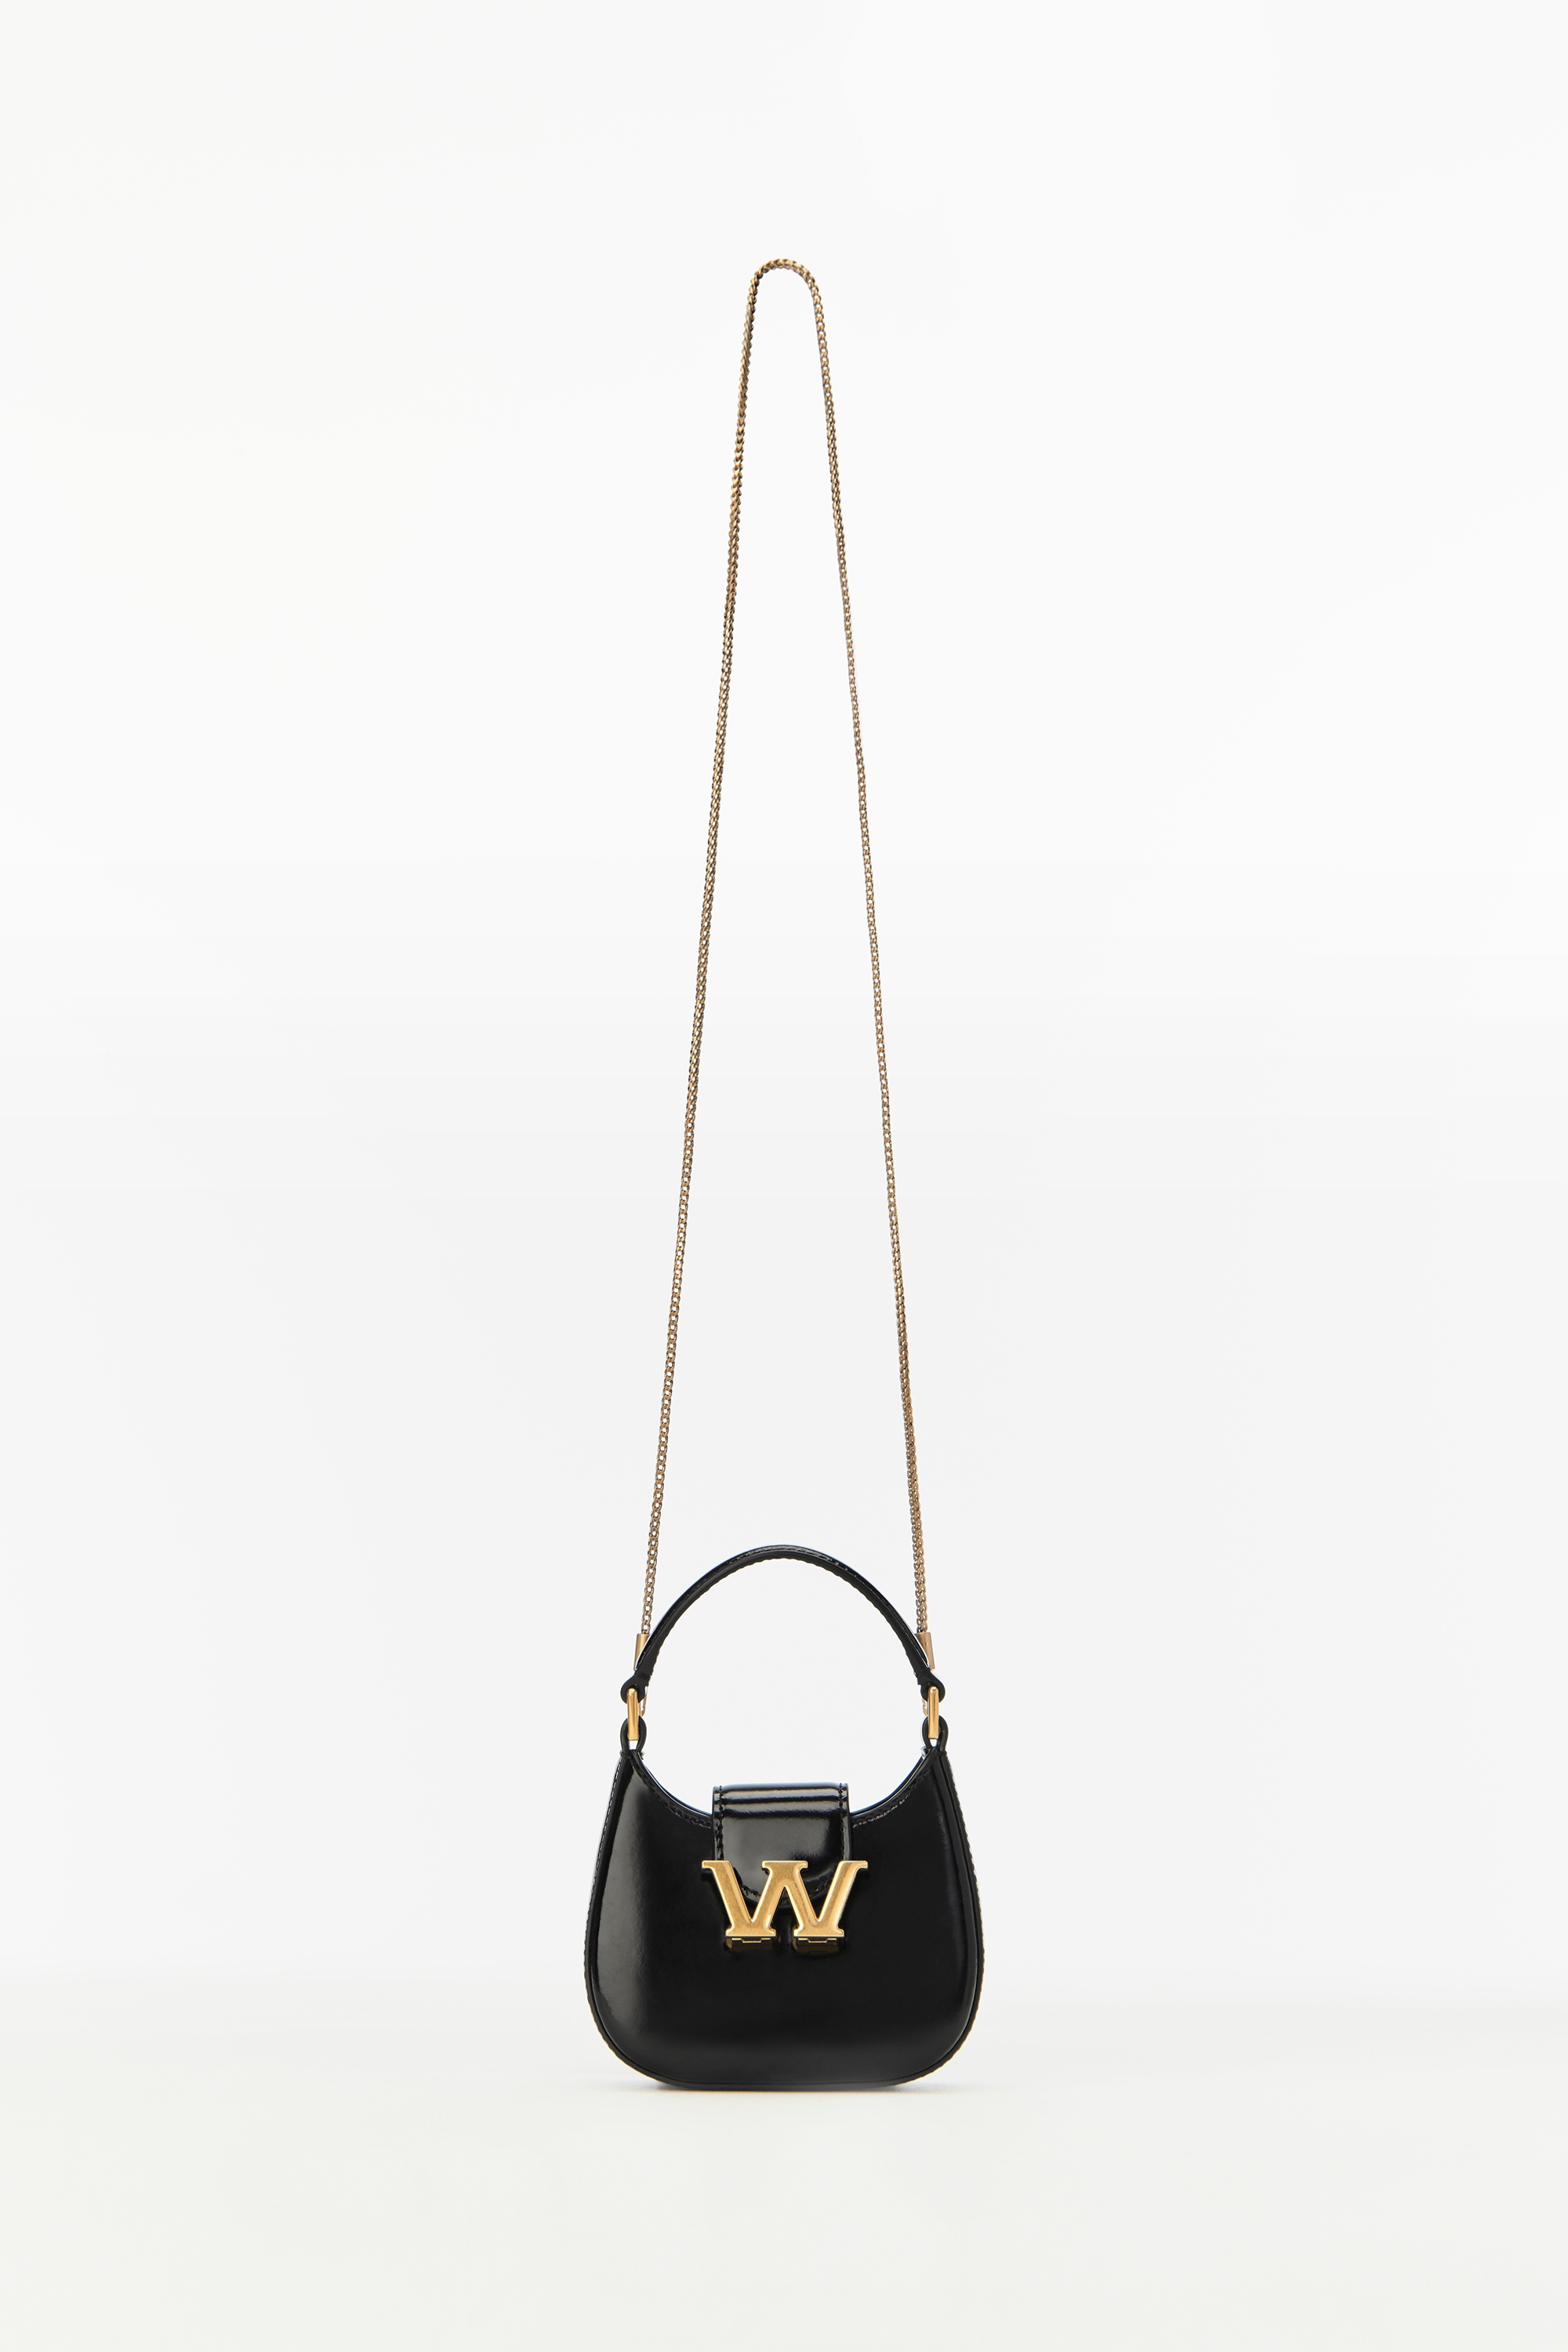 W LEGACY MICRO HOBO IN LEATHER - 4